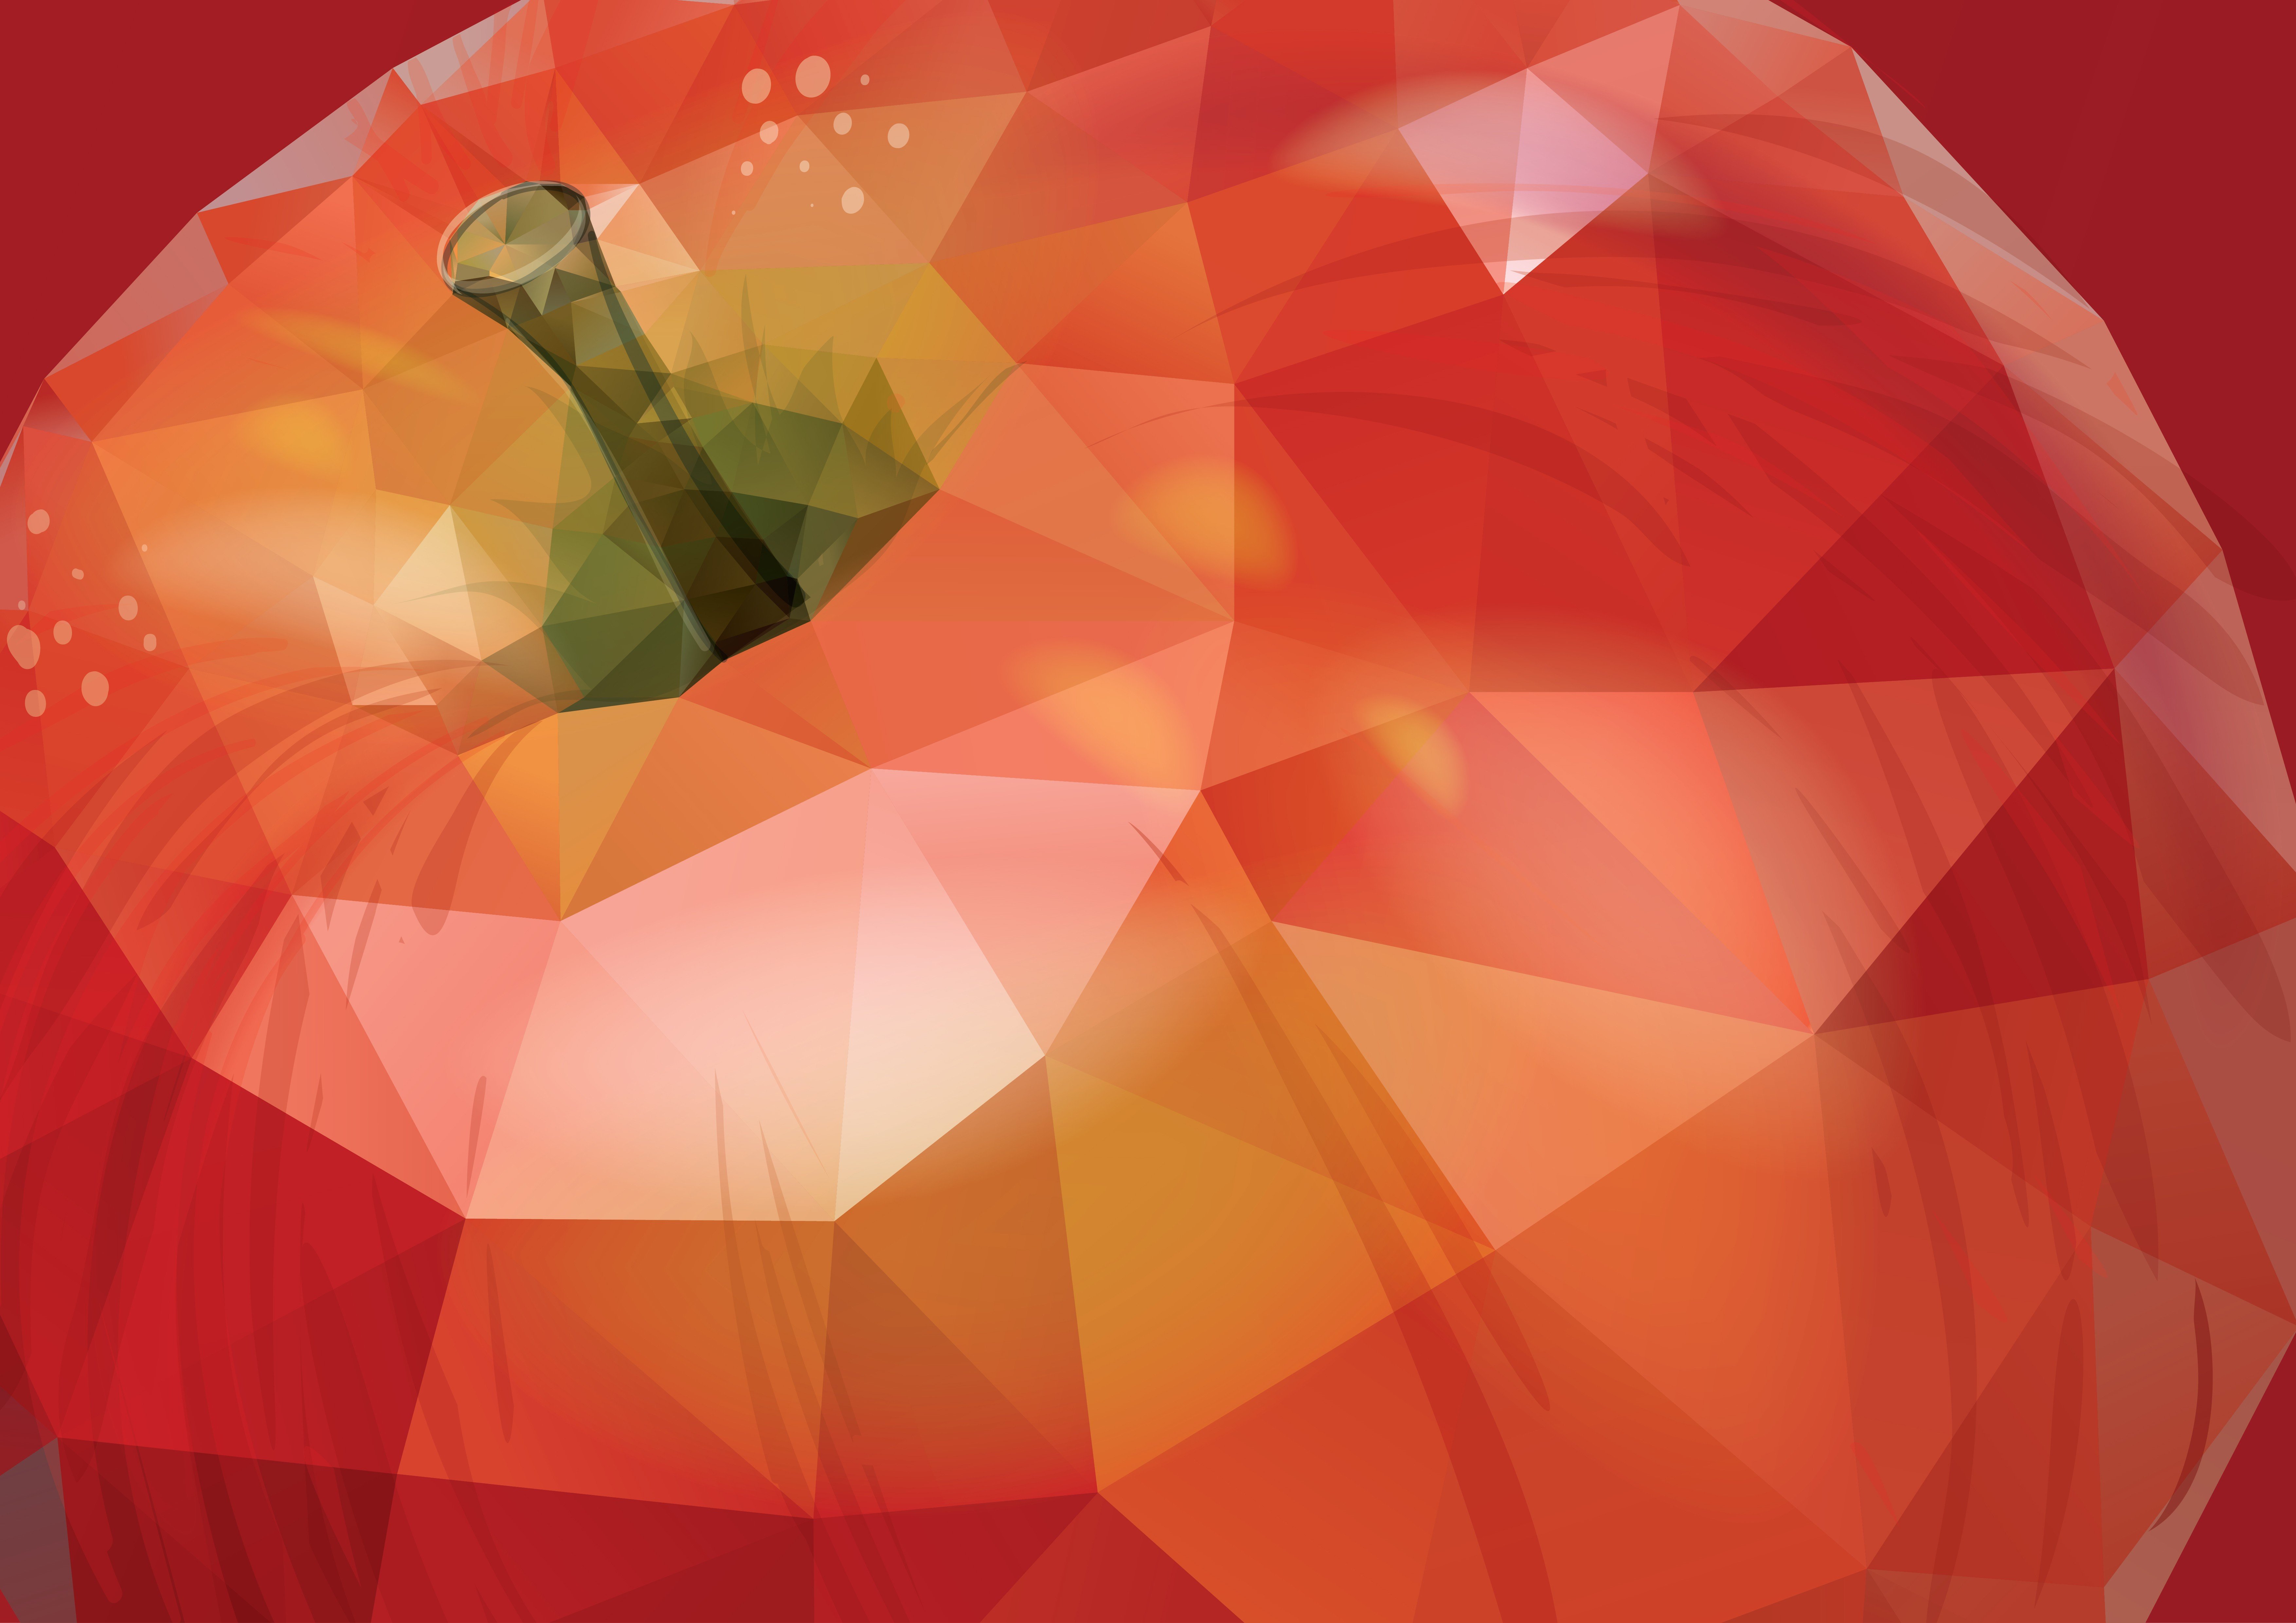 apples, Low poly Wallpaper